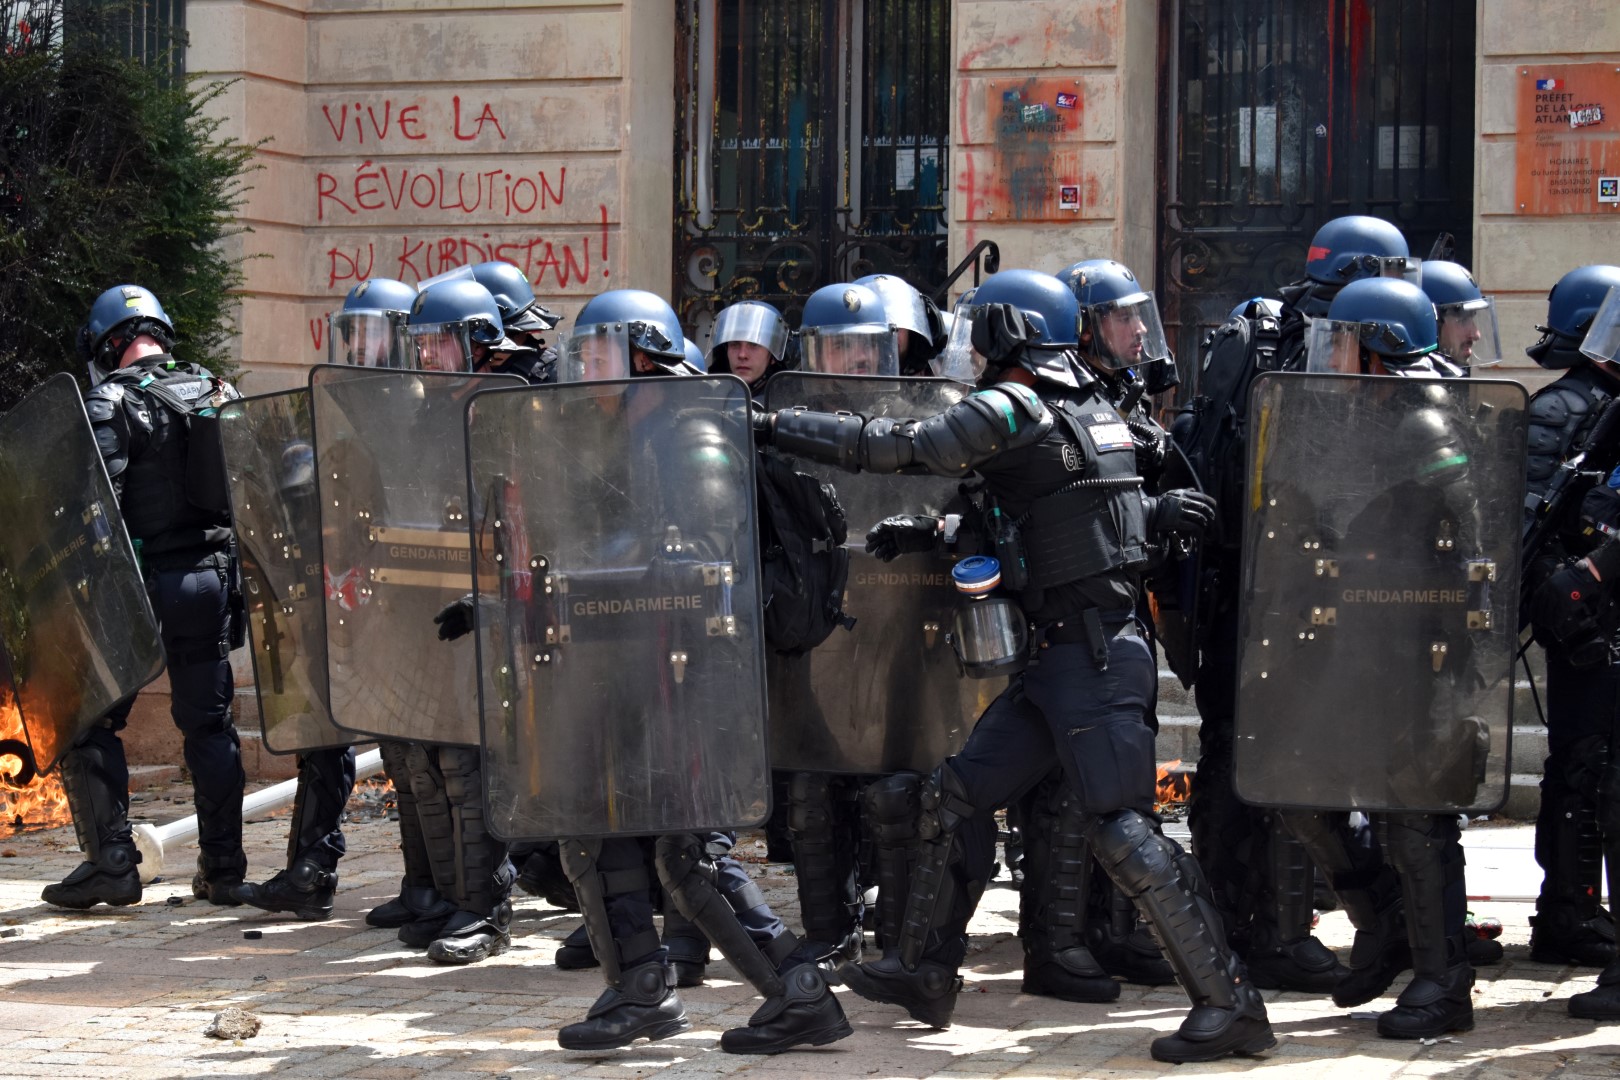 Thou shall not pass, May 1 protest, Nantes